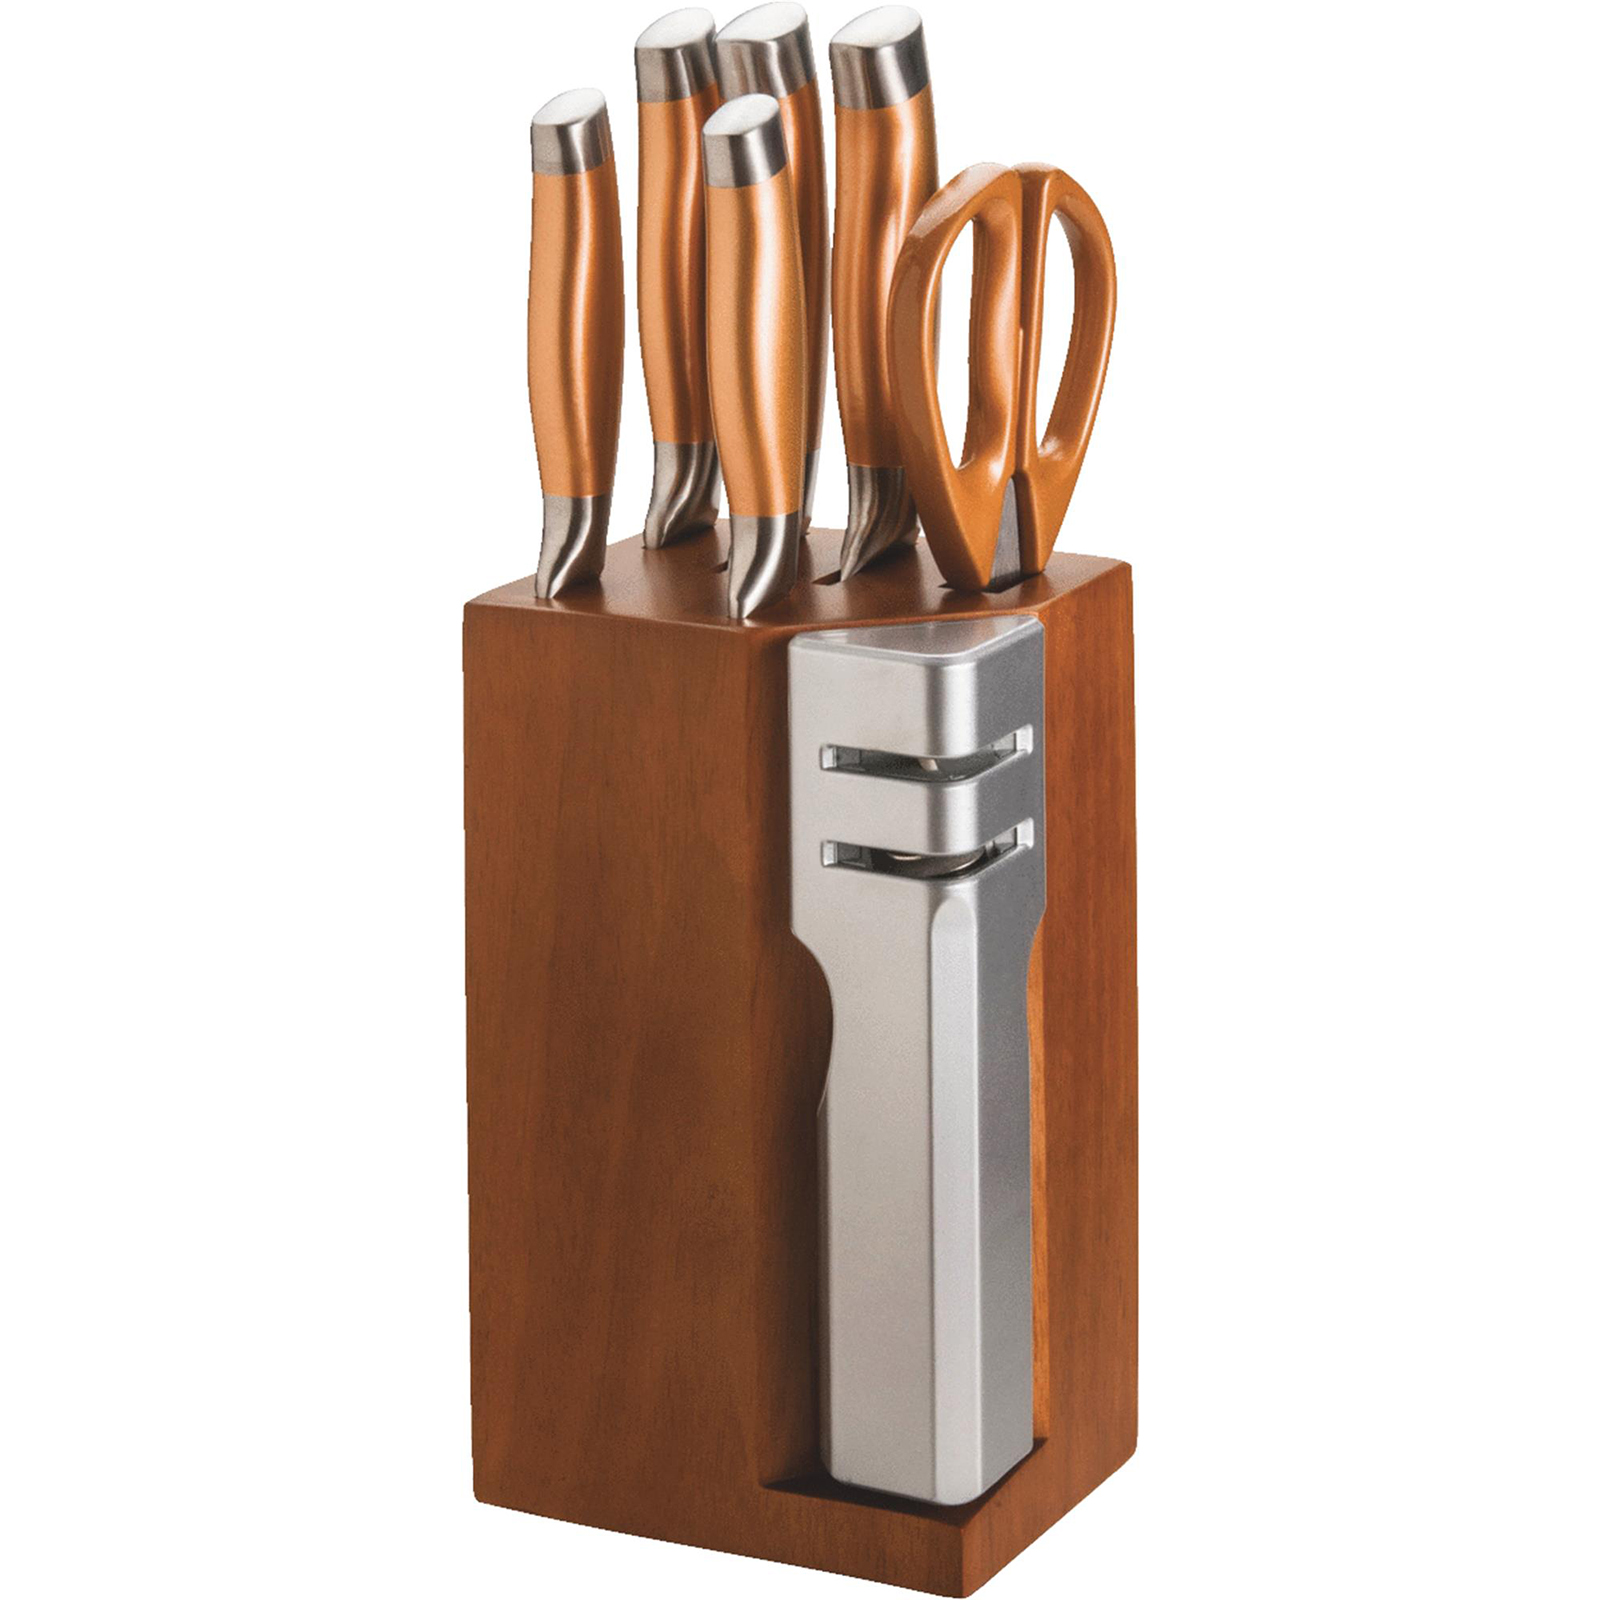 New England Cutlery 7pc. Stainless Steel Blade Knife Set with Block - Copper